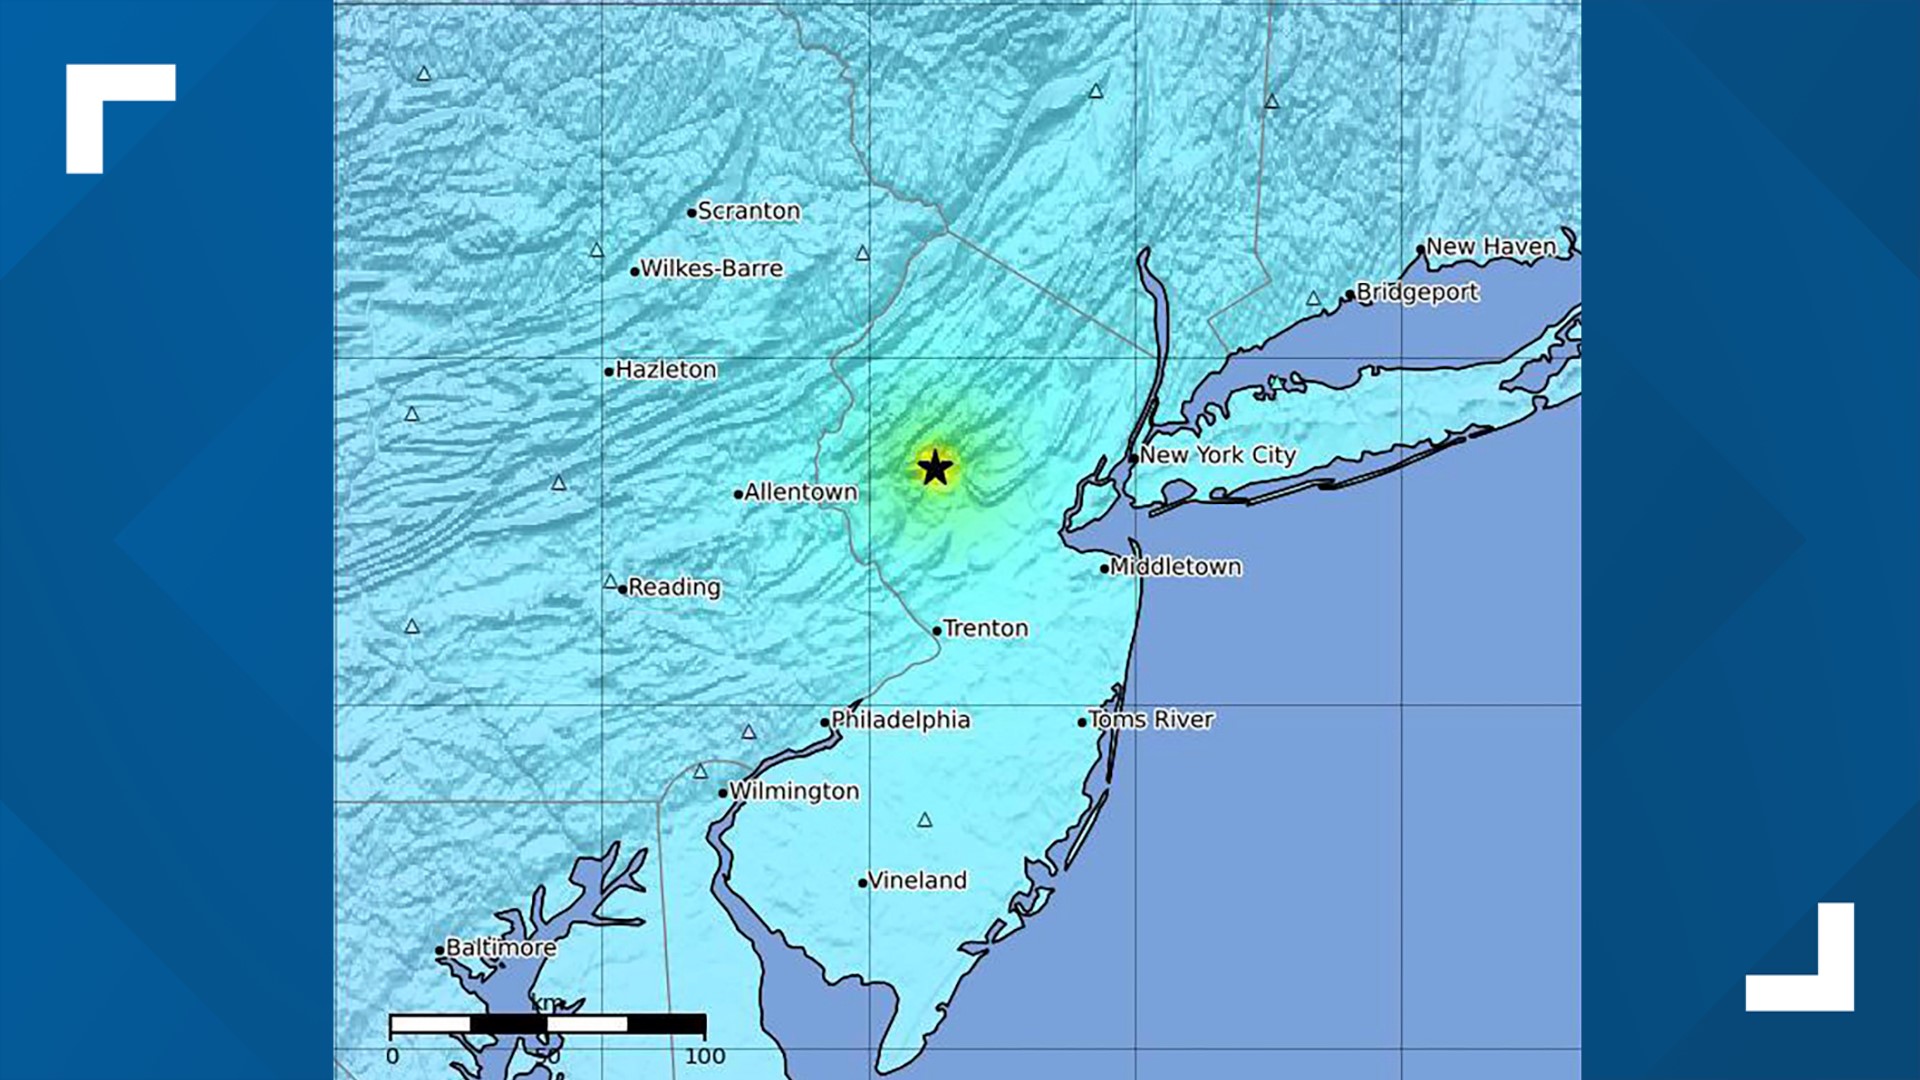 The U.S. Geological Survey reported a quake with a preliminary magnitude of 4.8, centered near Lebanon, New Jersey.